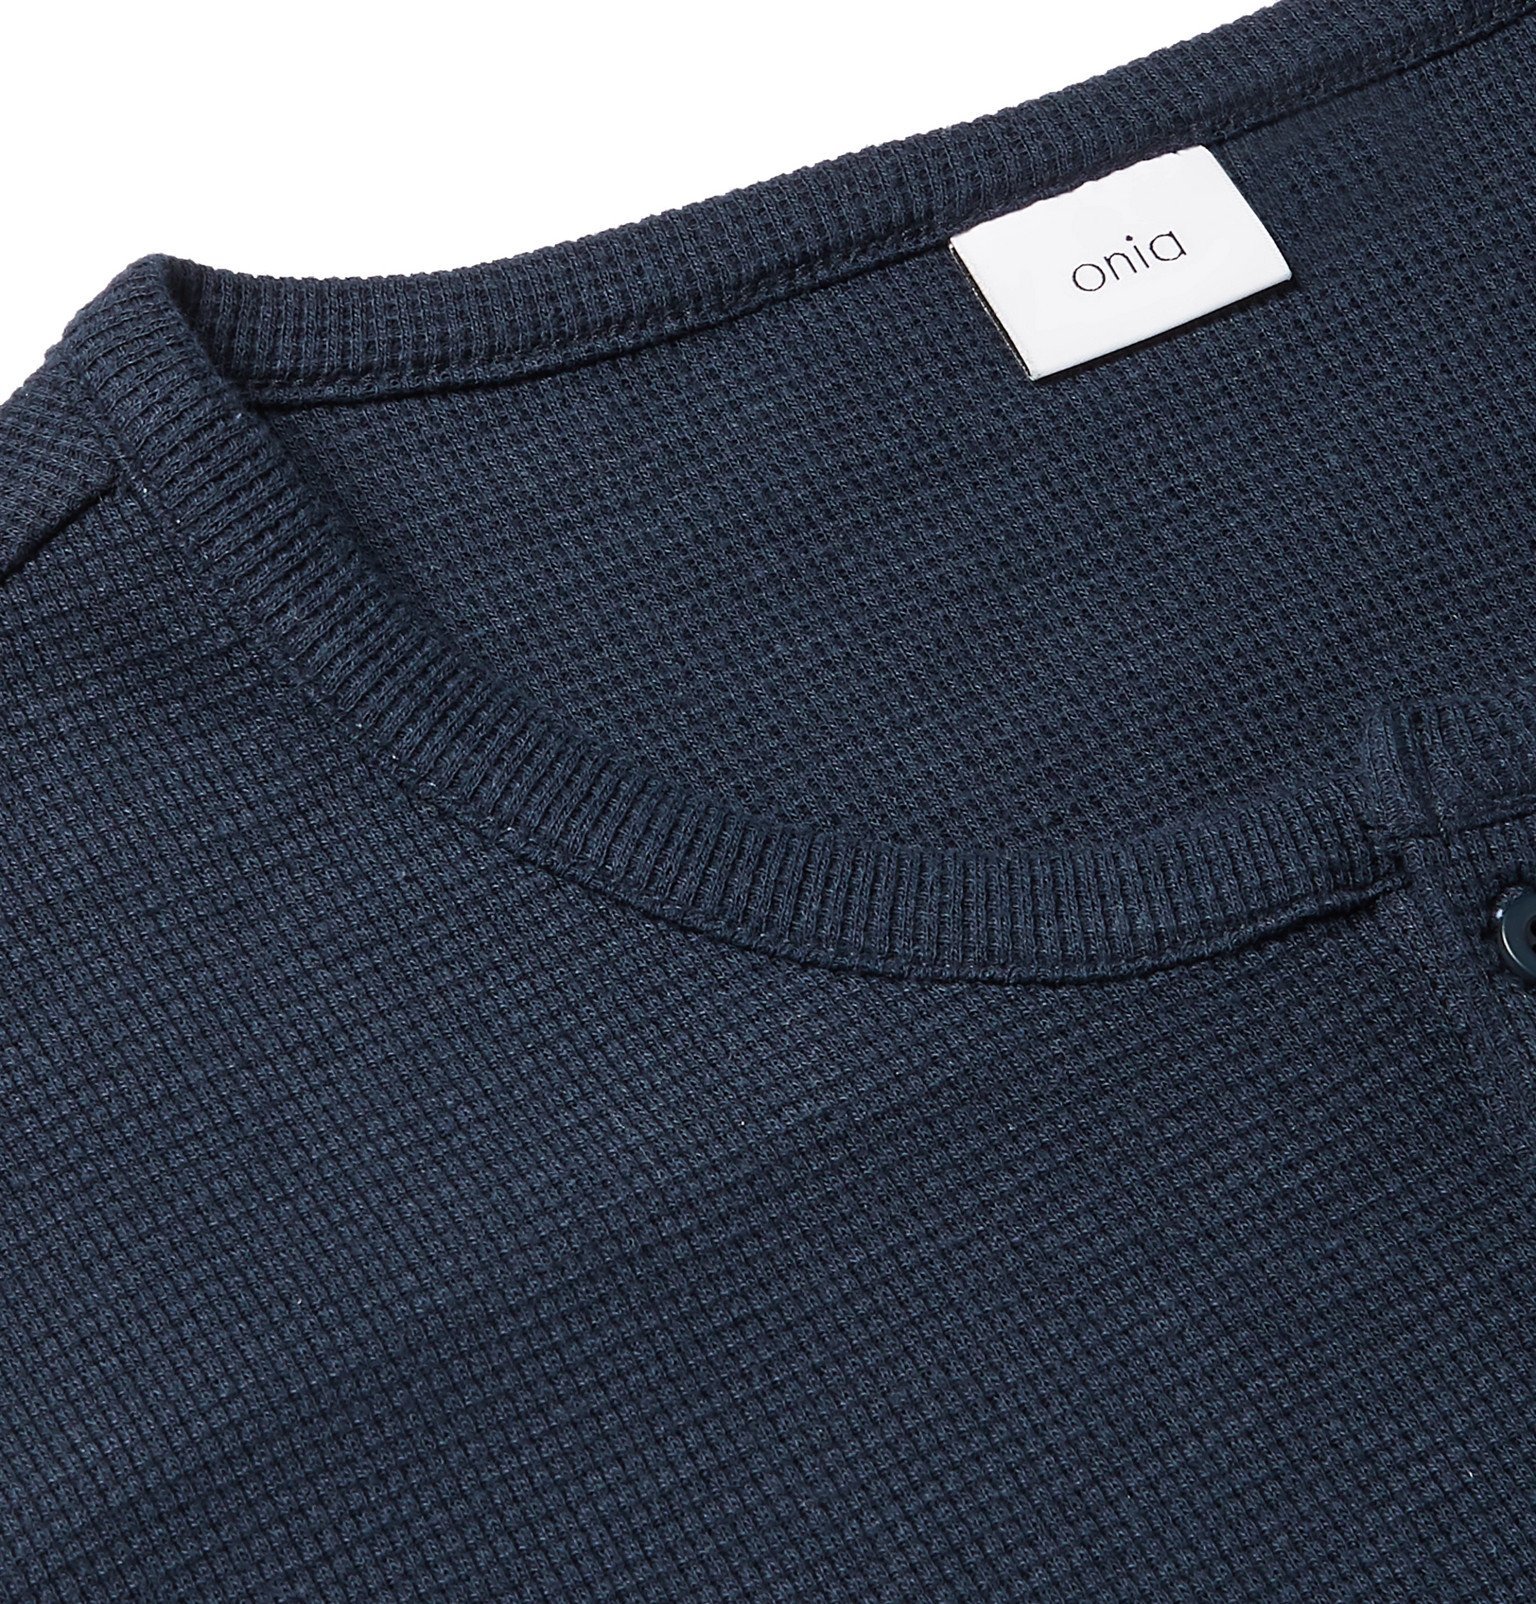 Onia - Miles Waffle-Knit Cotton-Blend Henley T-Shirt - Blue Onia